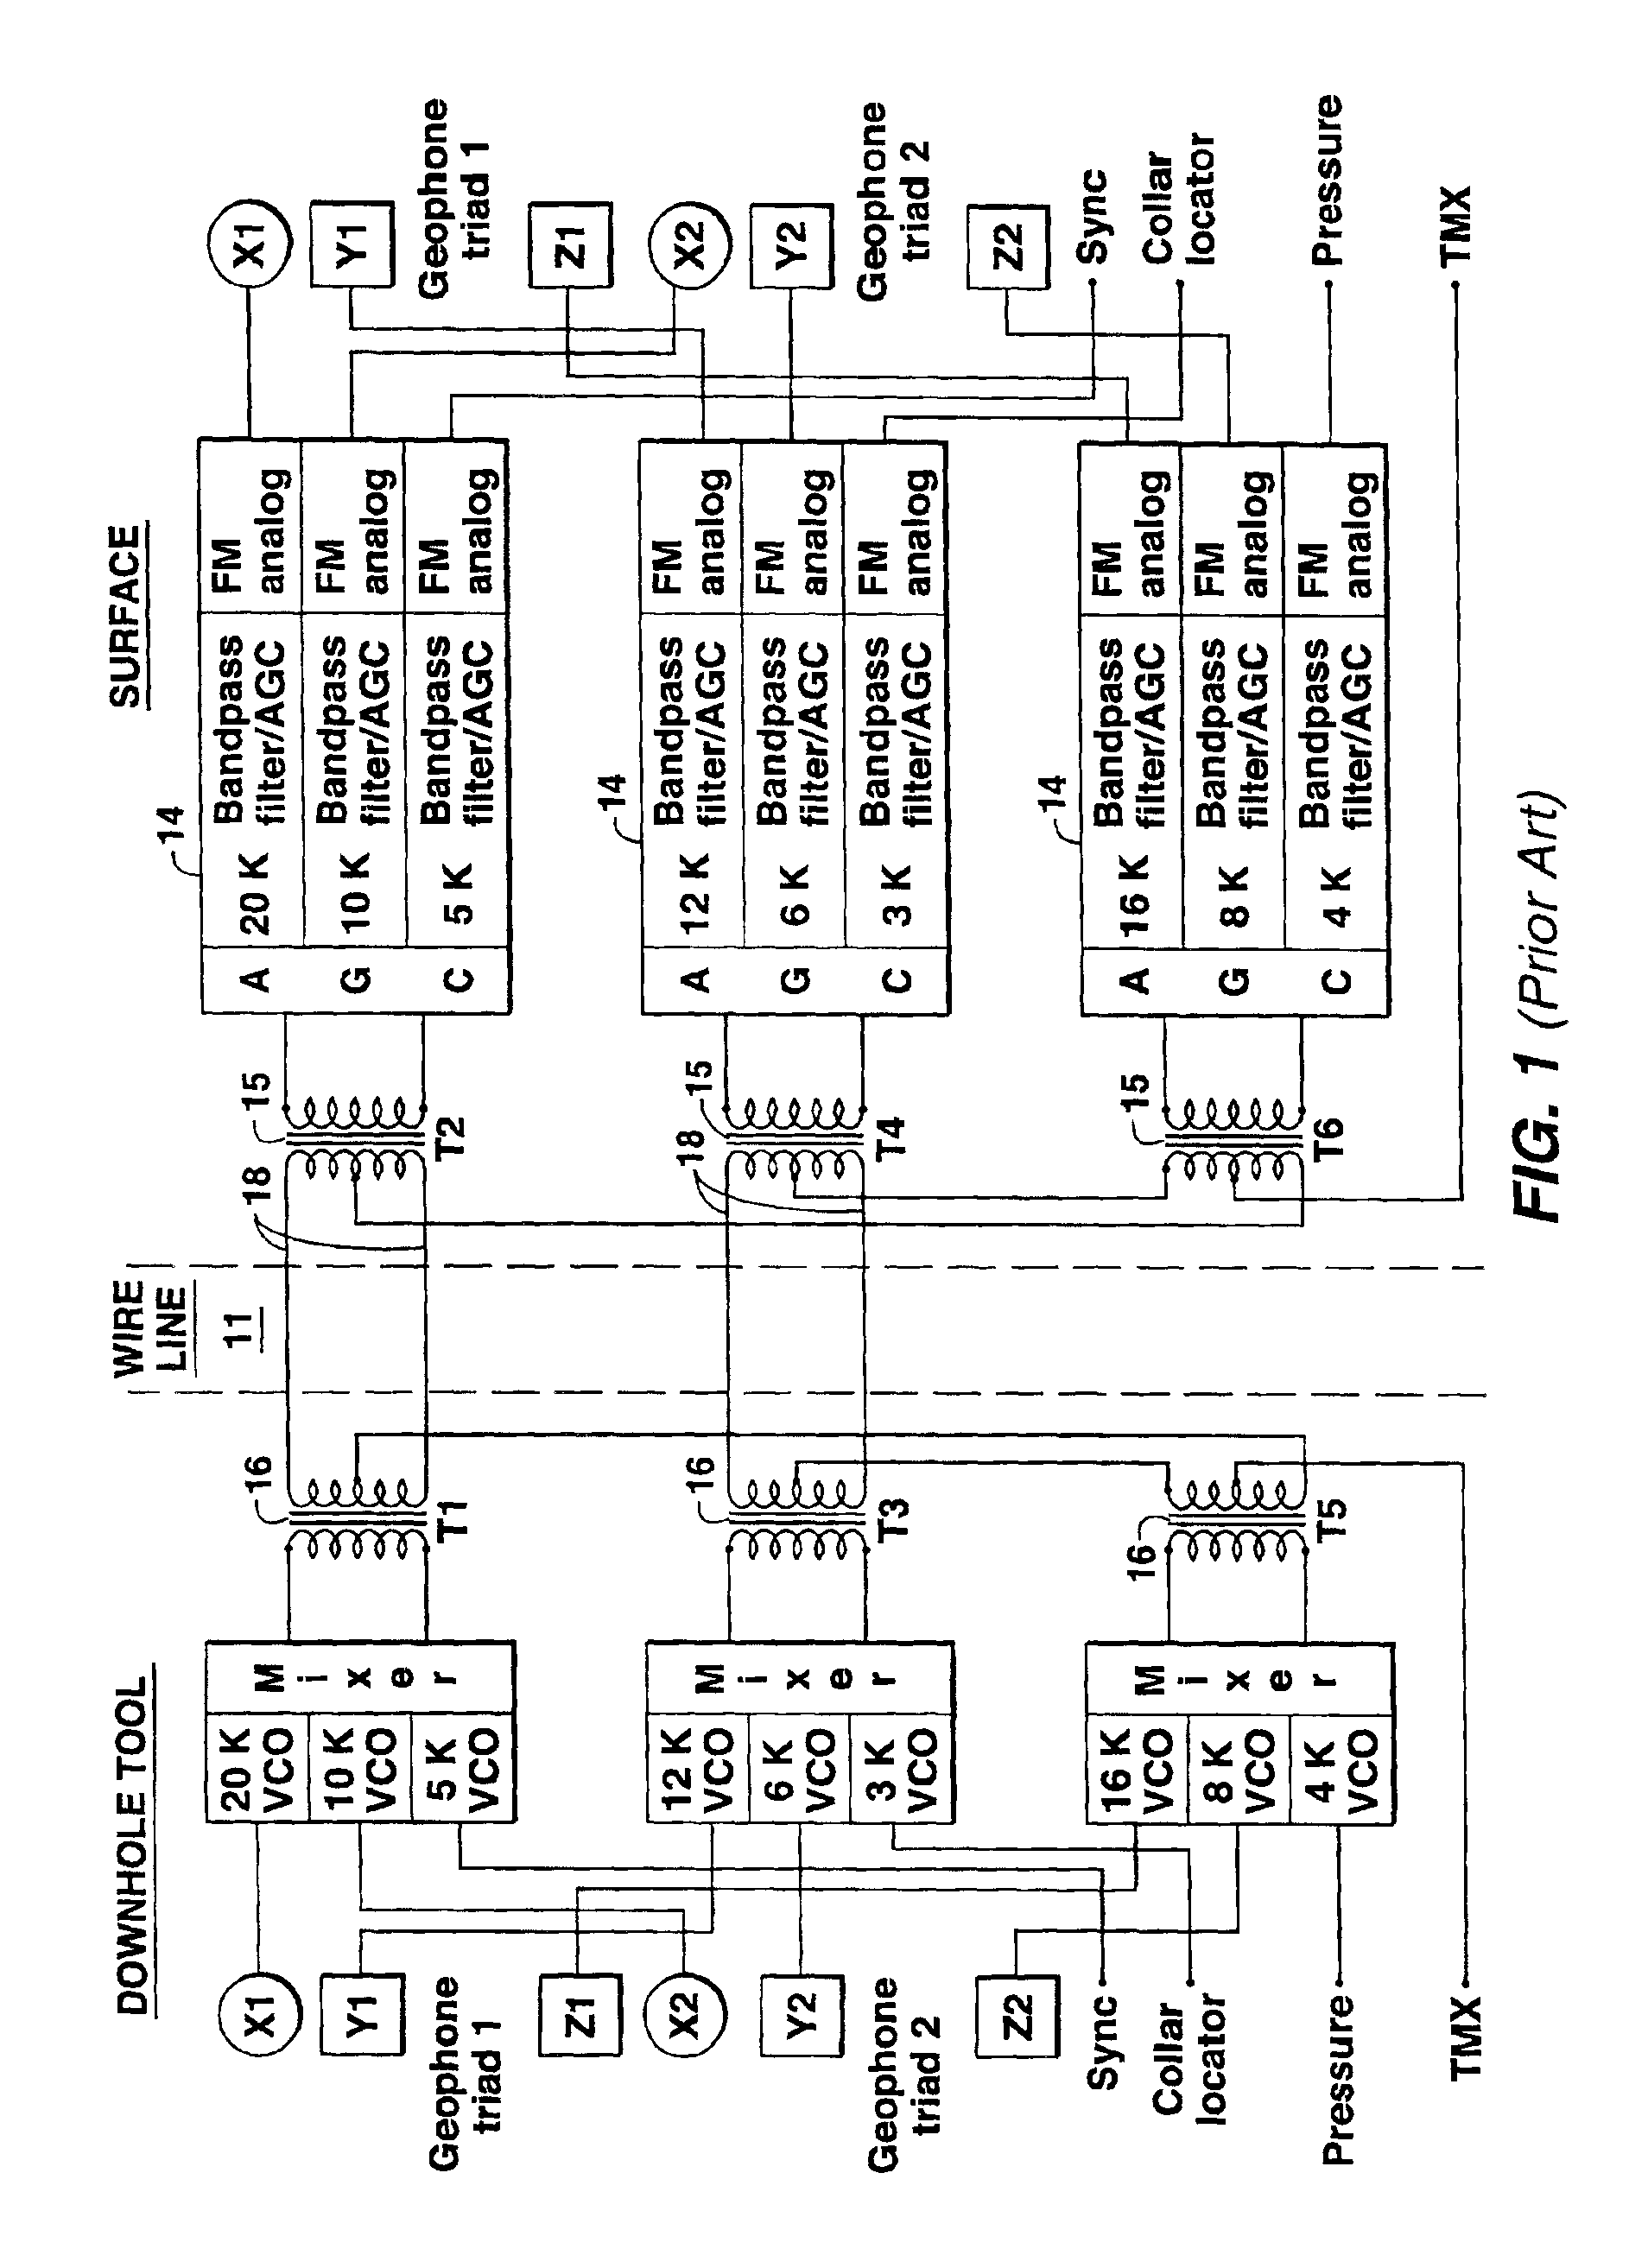 Data telemetry system for multi-conductor wirelines